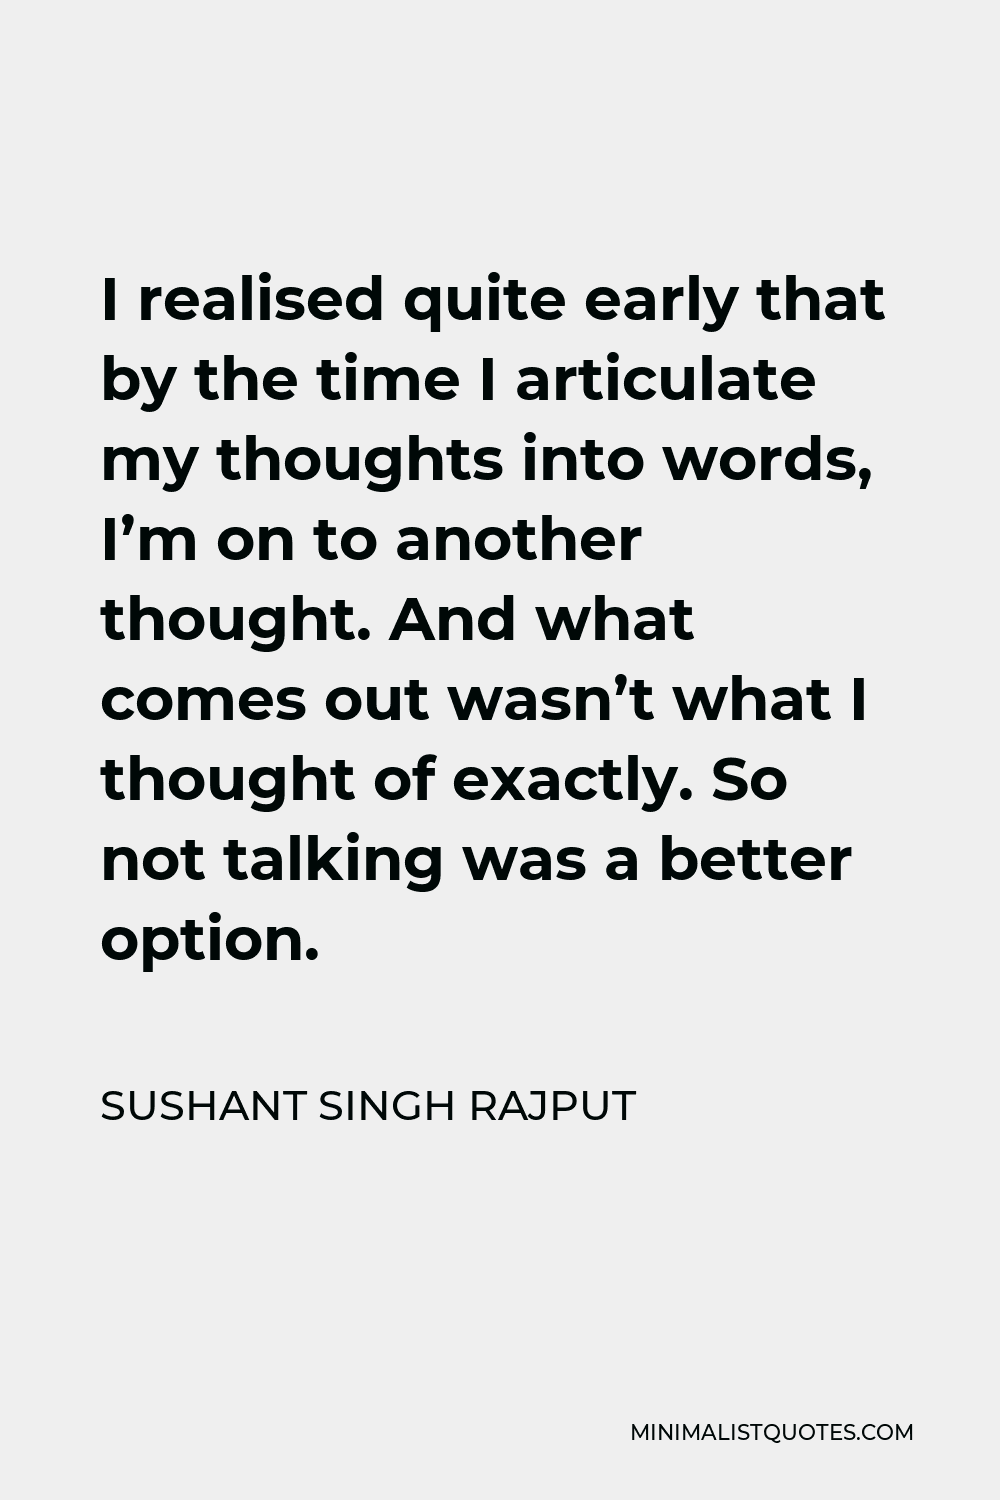 Sushant Singh Rajput Quote - I realised quite early that by the time I articulate my thoughts into words, I’m on to another thought. And what comes out wasn’t what I thought of exactly. So not talking was a better option.